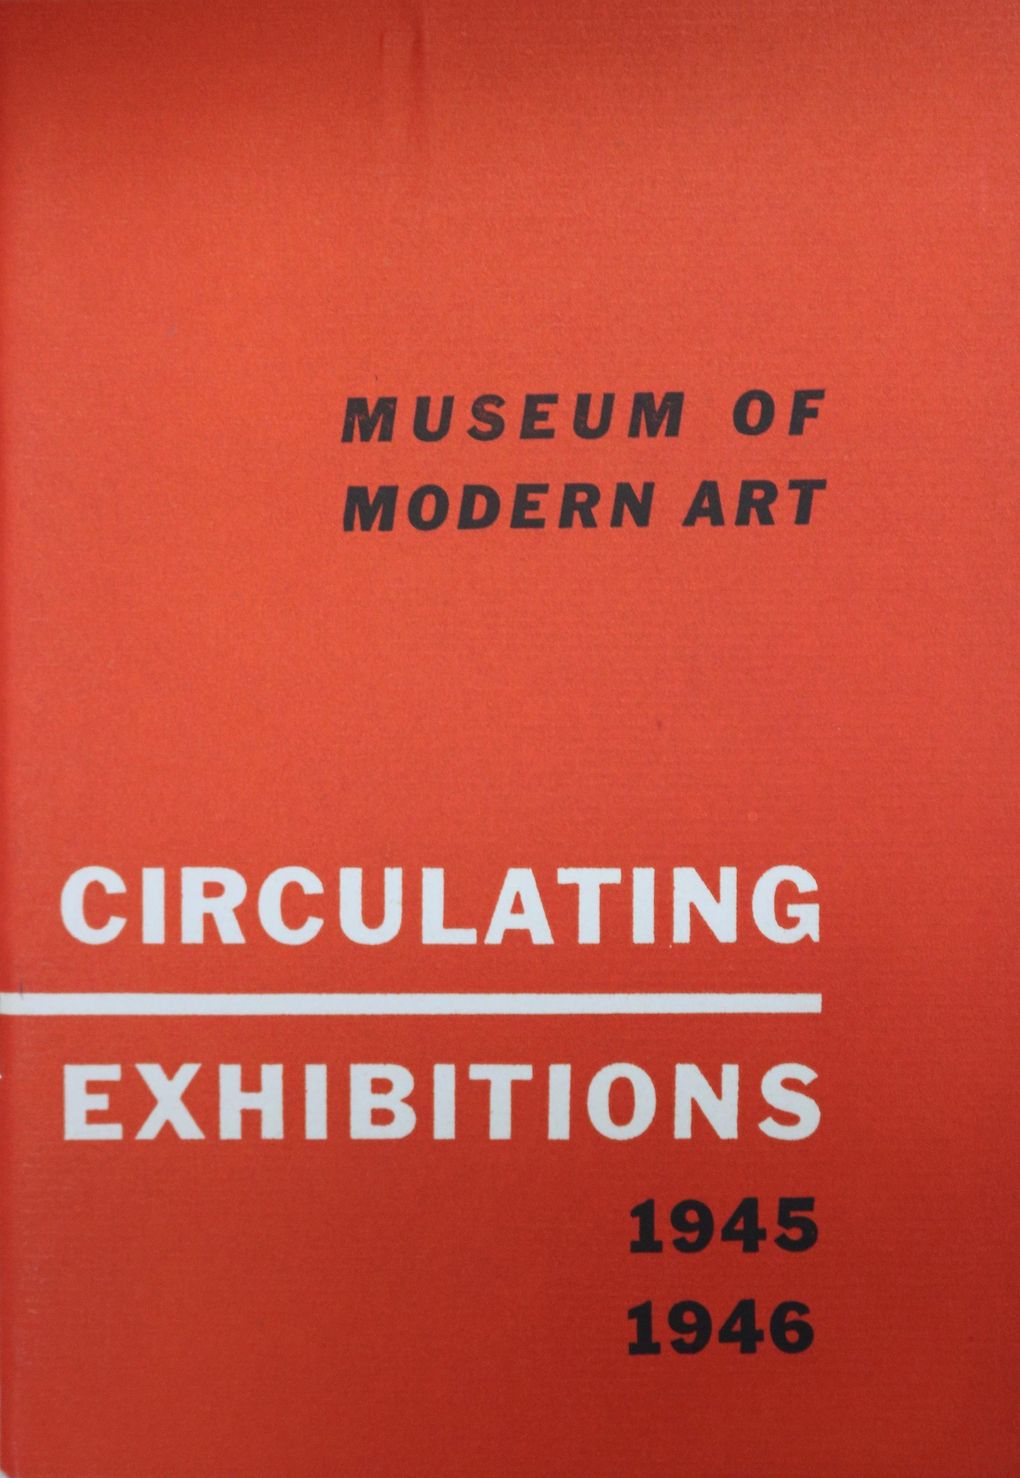 As curator at the Henry Art Gallery, Halley Savery brought exhibits of midcentury architecture curated by the Museum of Modern Art to Seattle to expose University of Washington students to the latest in art and design. (University of Washington Libraries, Special Collections, Halley Savery Archive)
